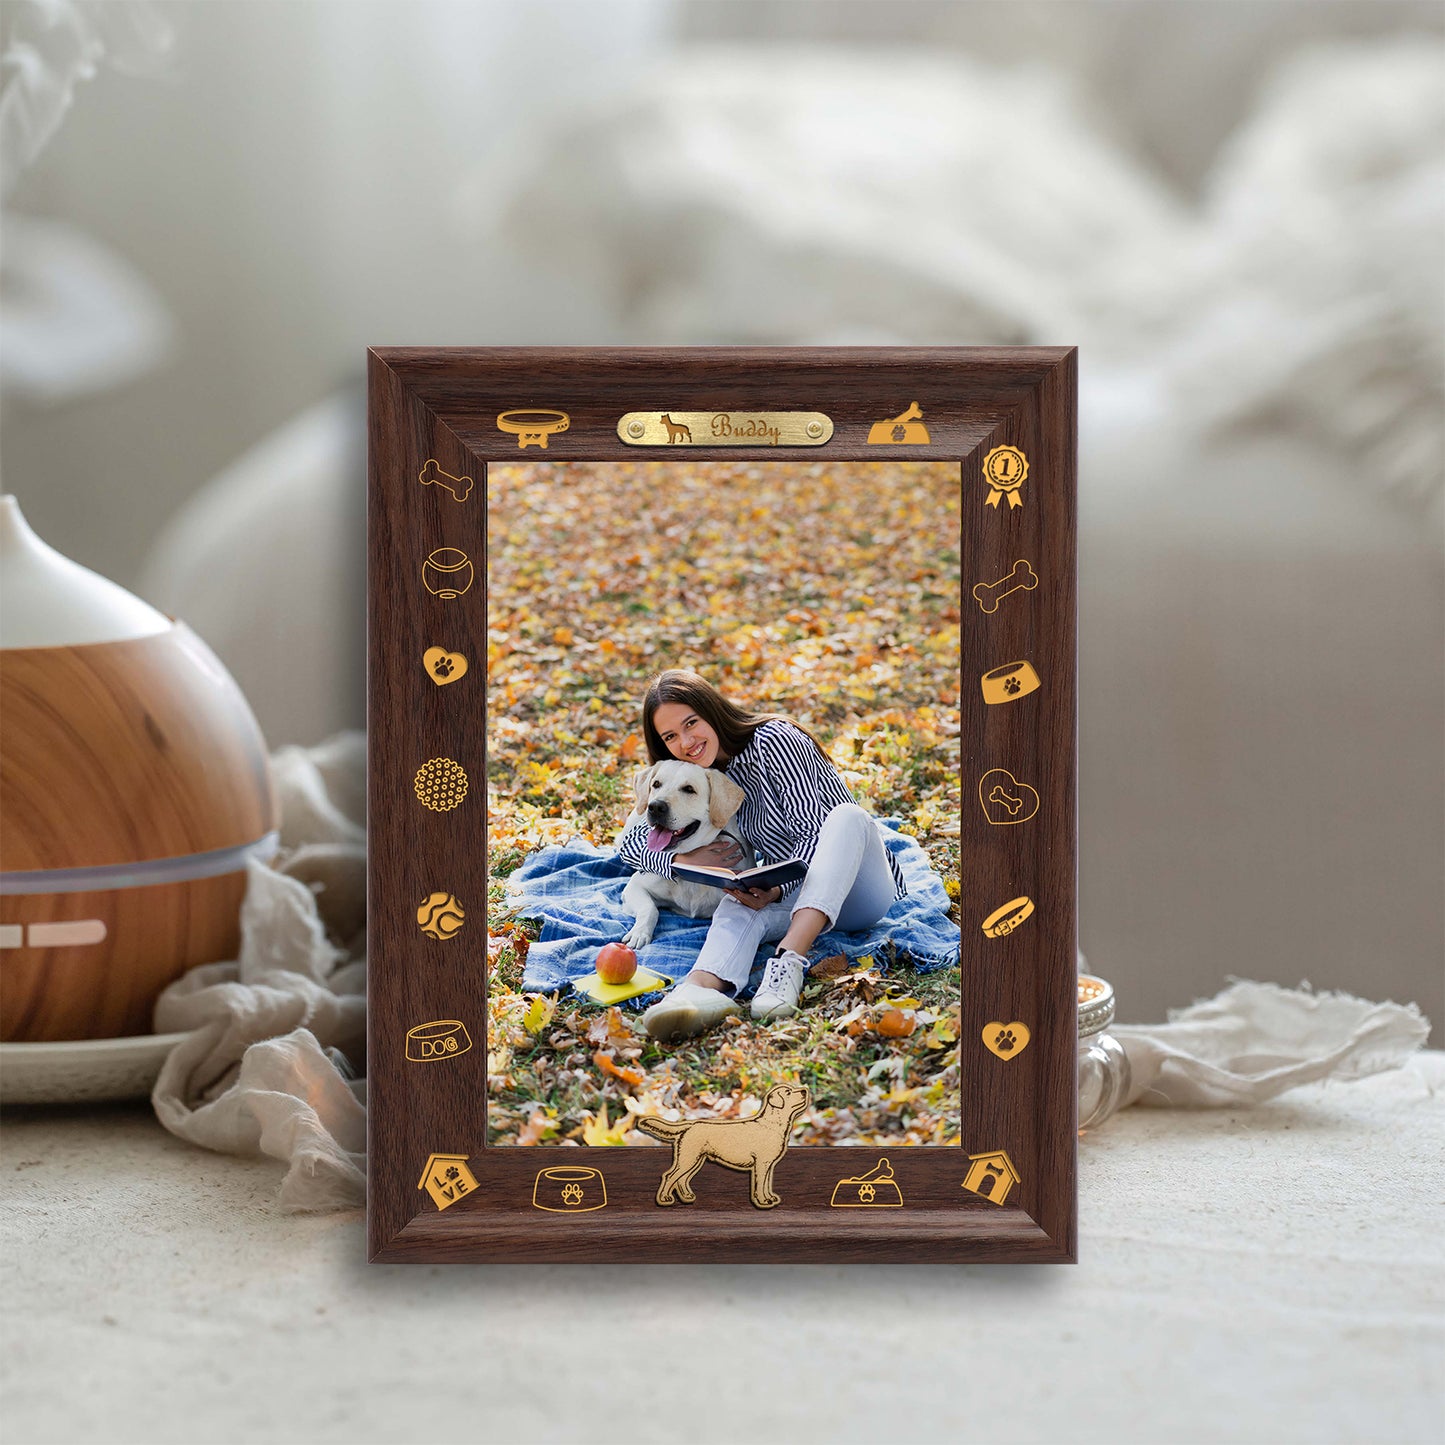 Decoration For Photo Frame Dotride Custom Picture Frame, Wood Photo Frame with Custom Wooden Carving, Can be engraved with any text you want, suitable for Suitable for Various Themes, Golden Retriever